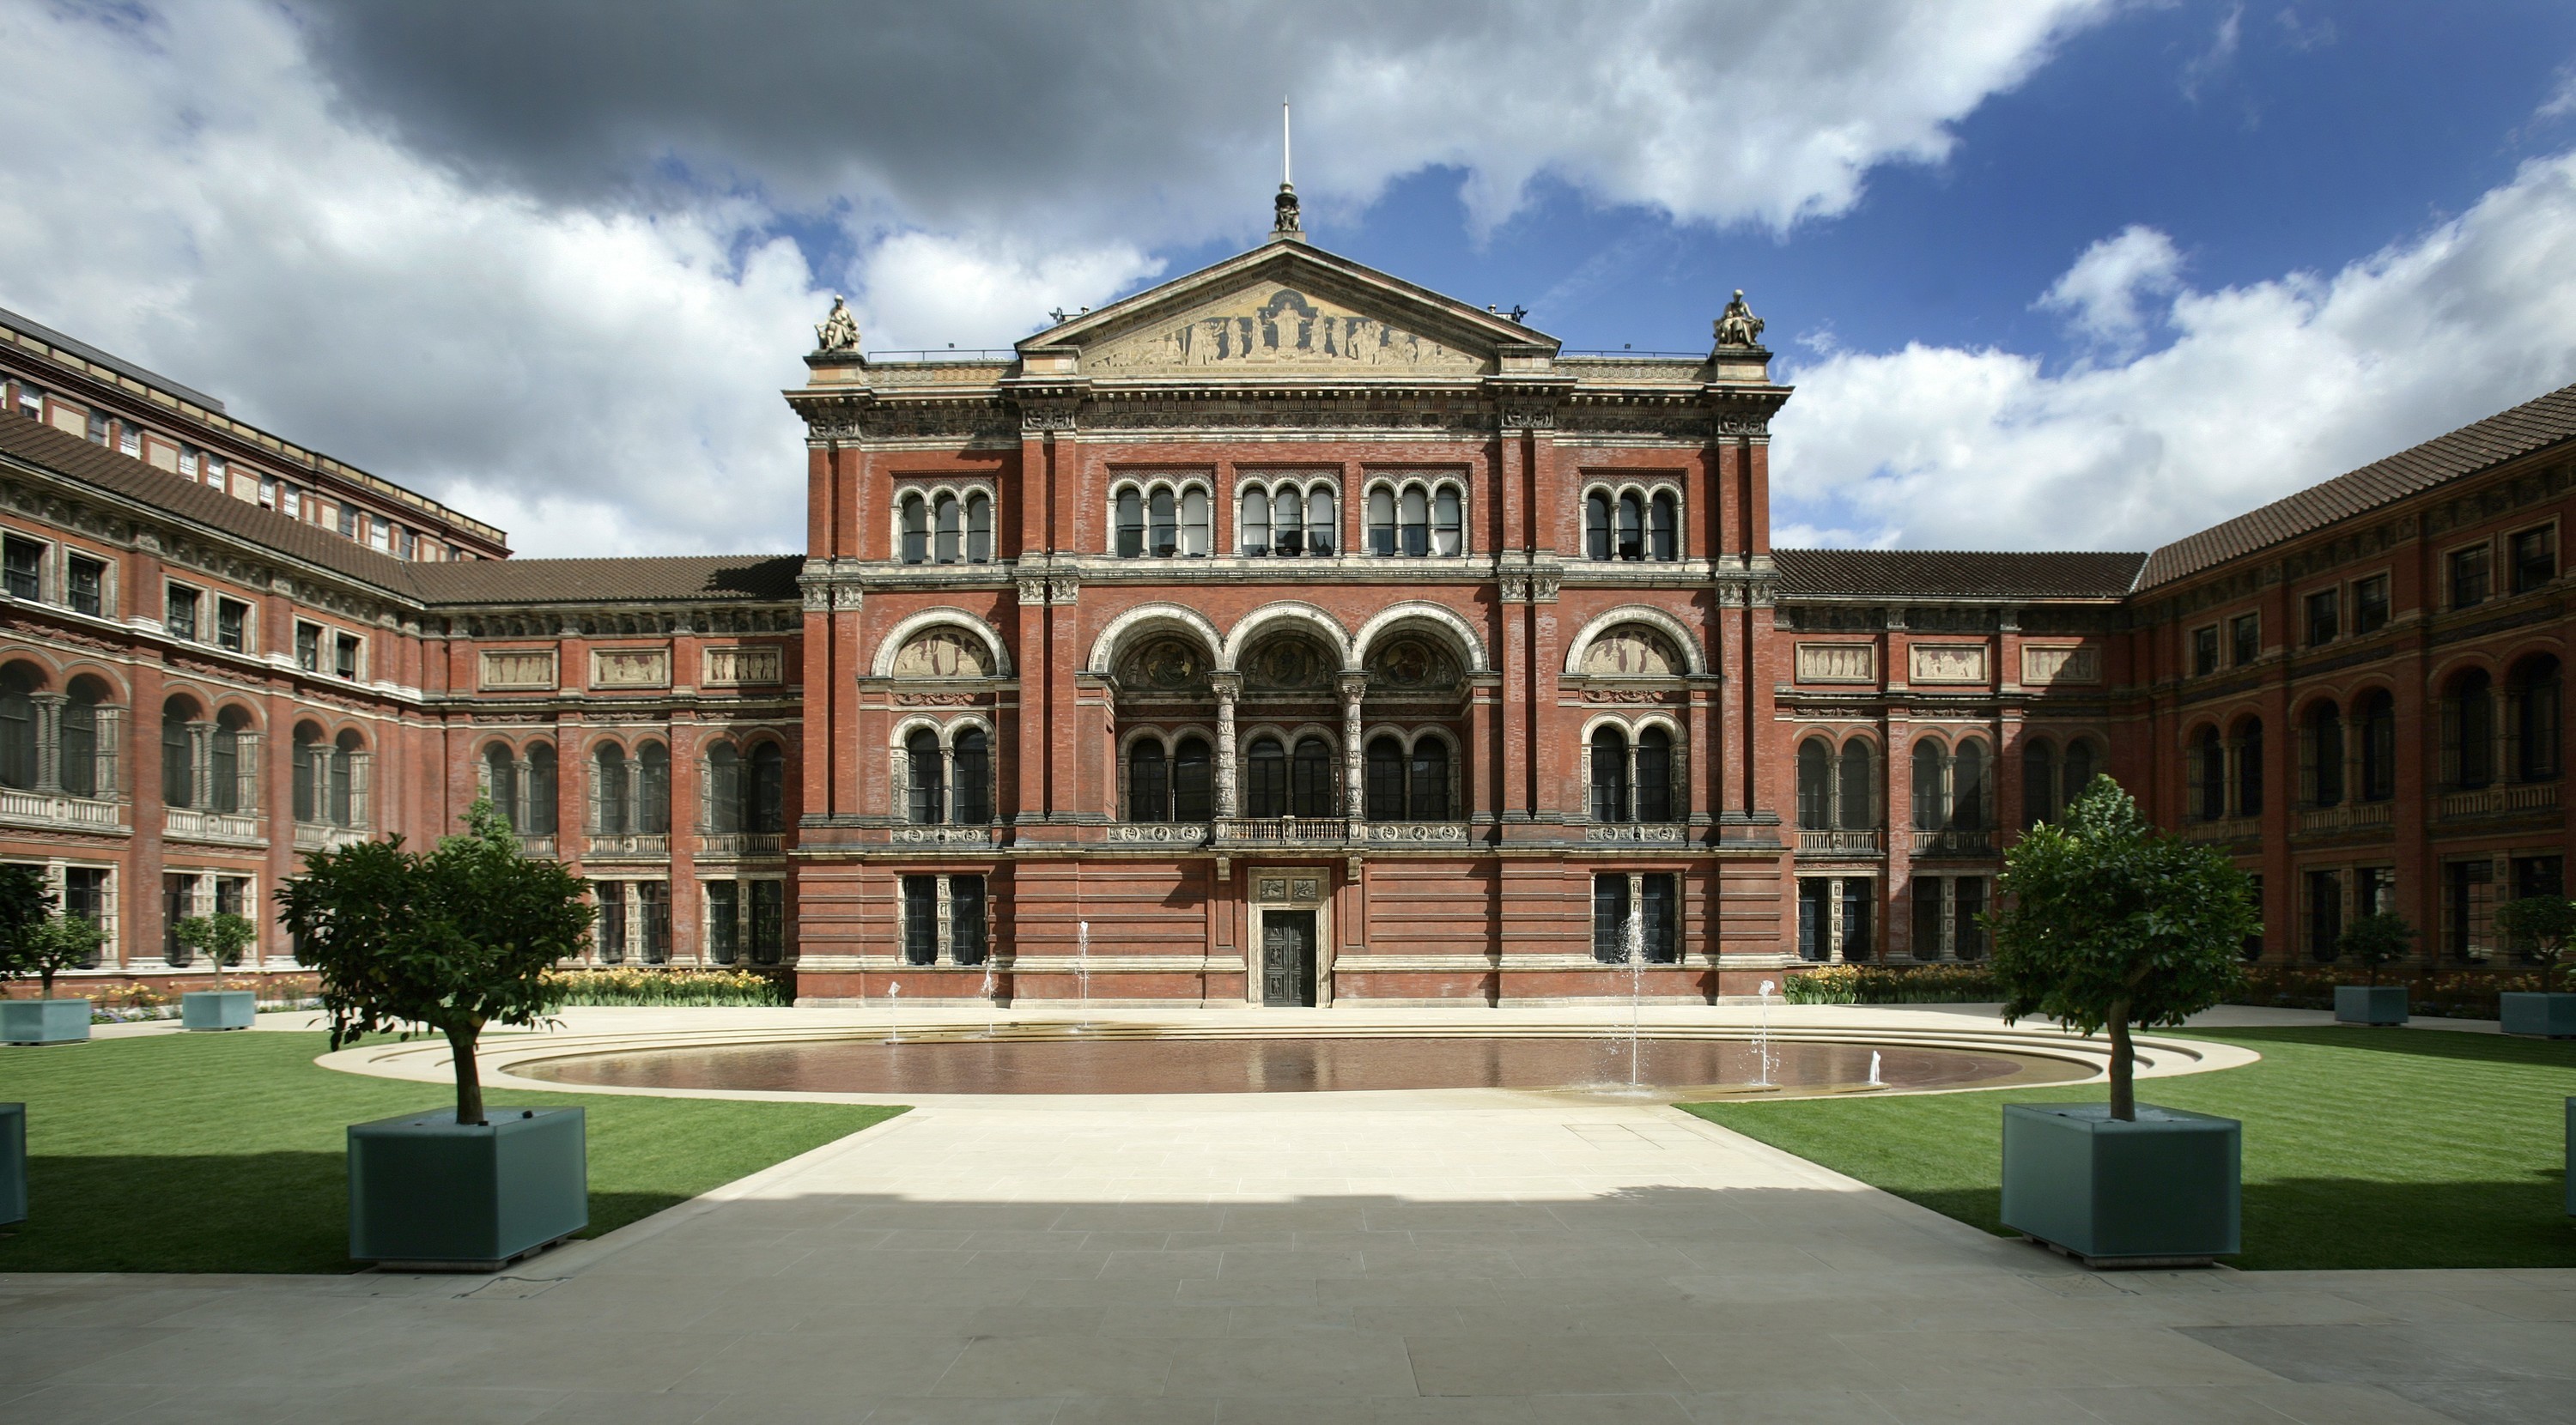 The seven wonders of the V&A - seven best objects in the V&A museum